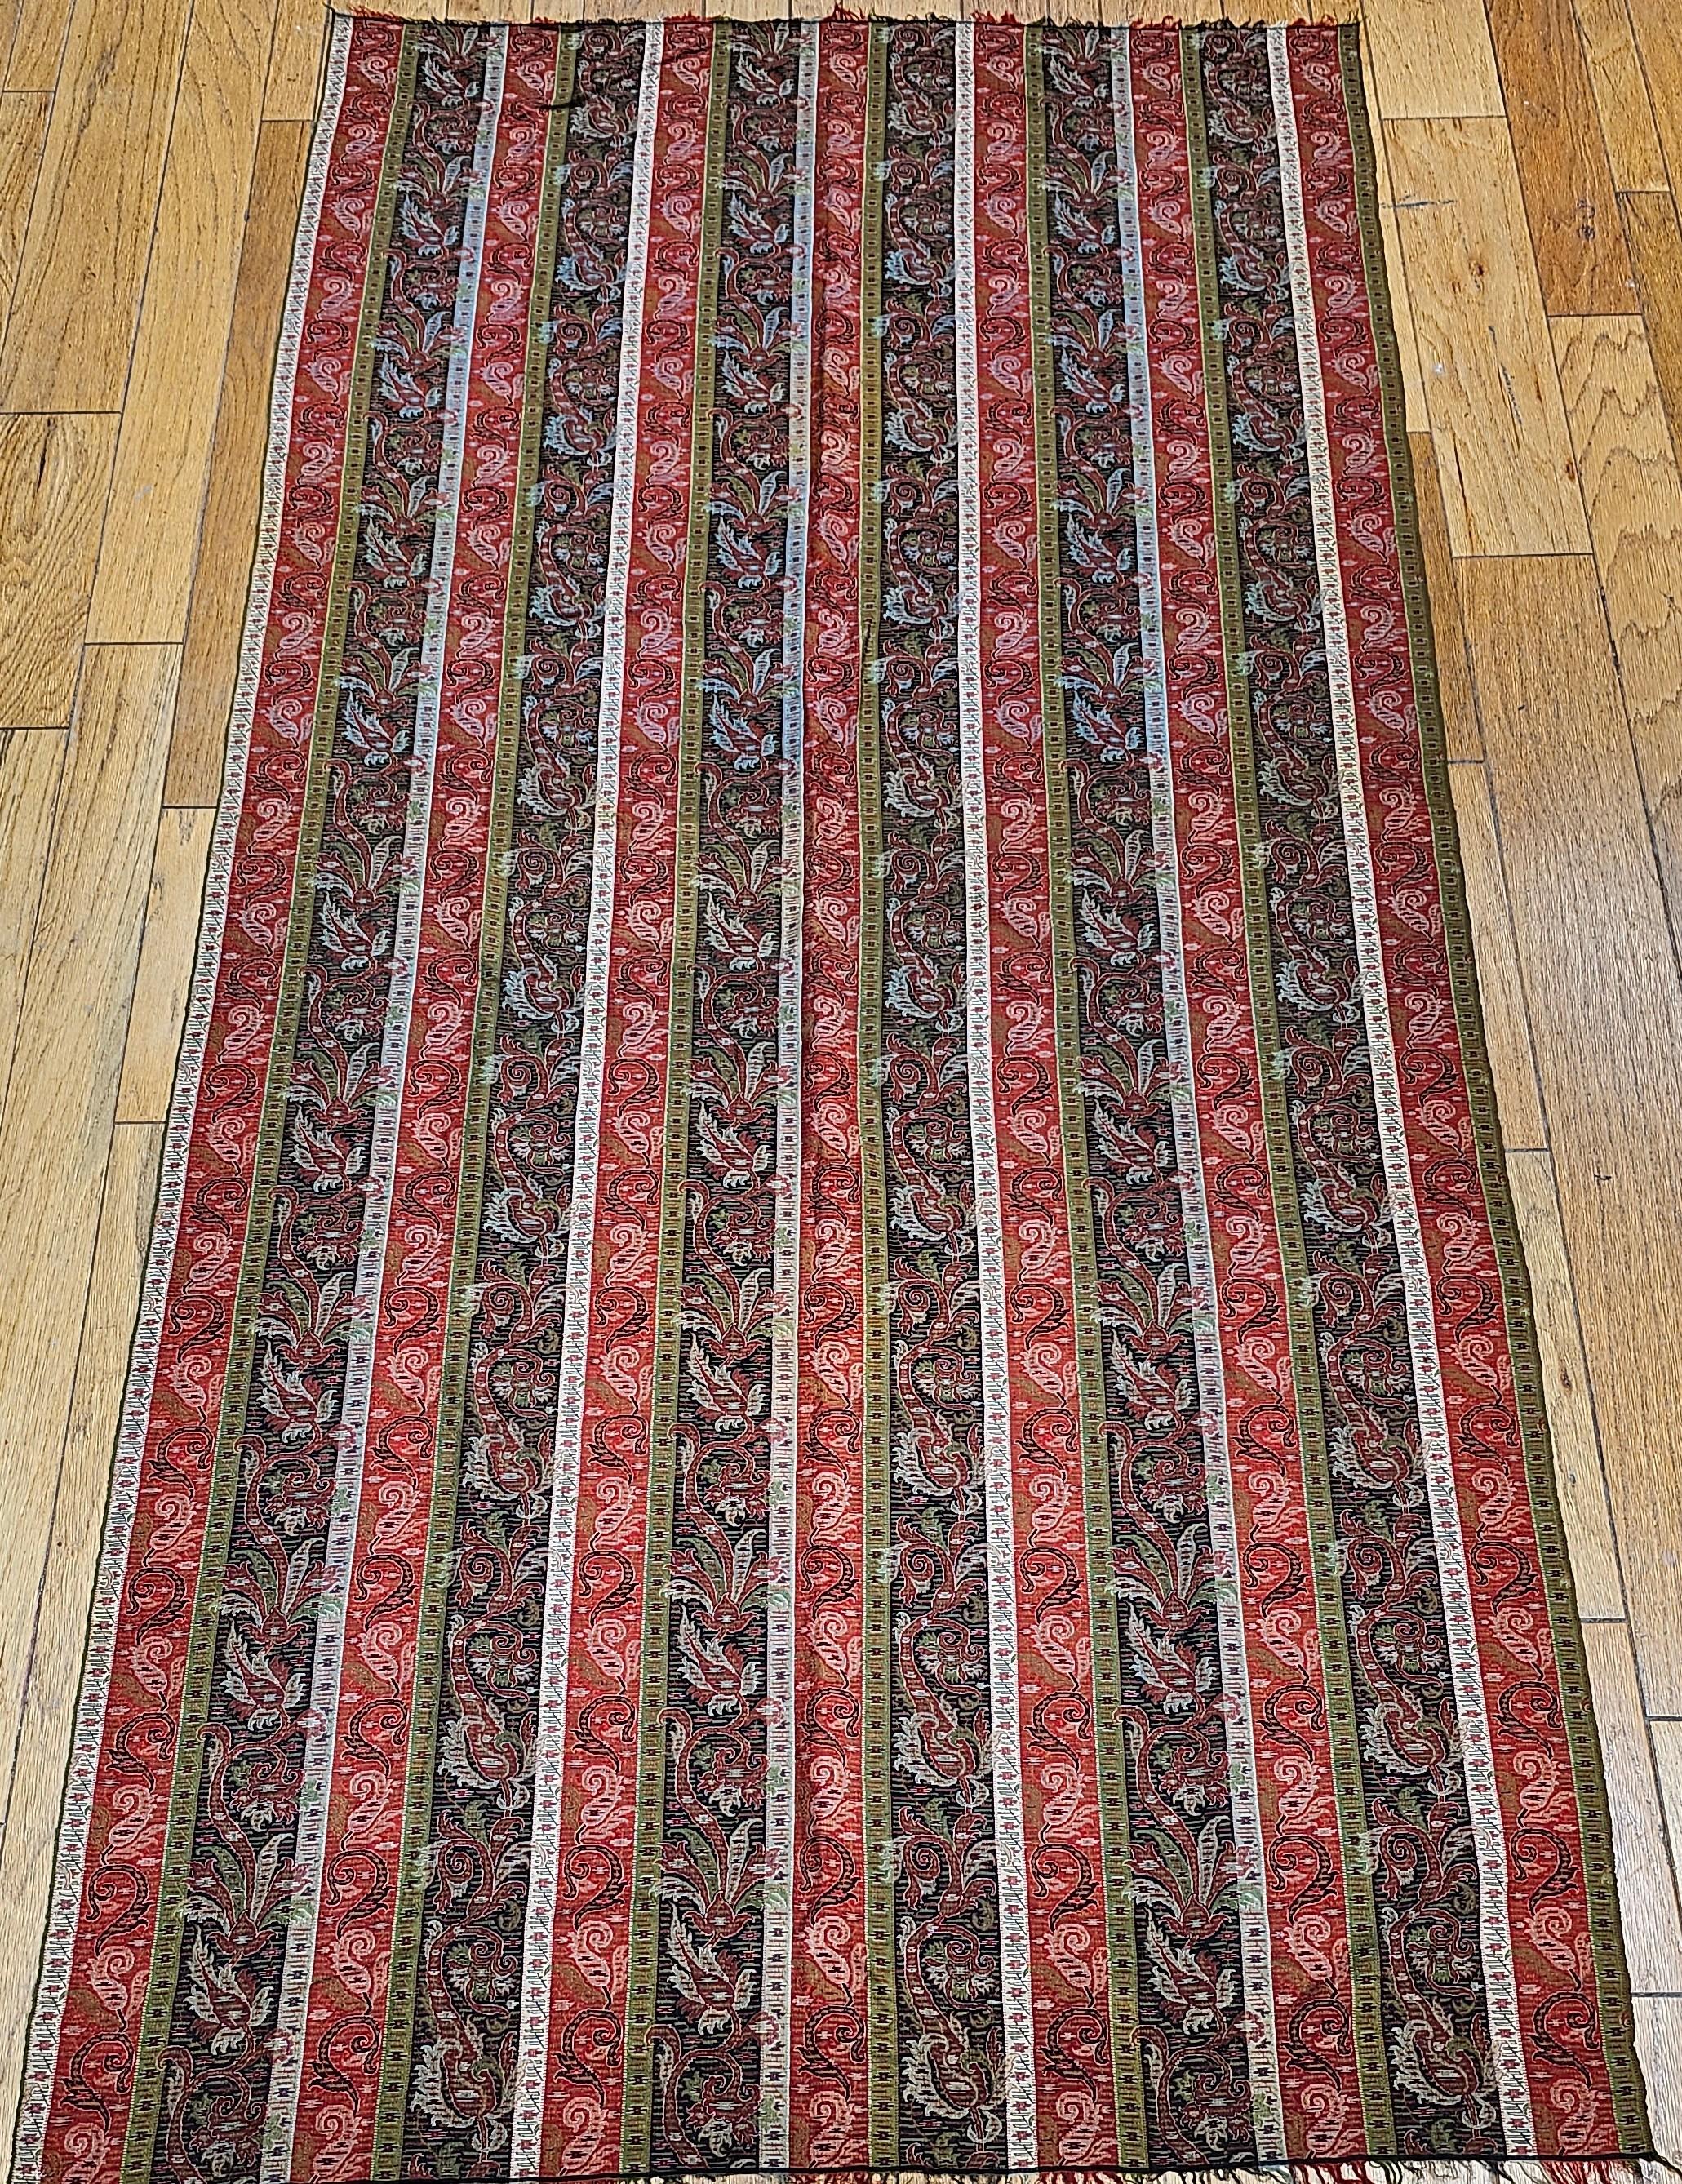 Indian 19th Century Hand-Woven Kashmiri Paisley Shawl in Brick Red, Ivory, Black, Green For Sale